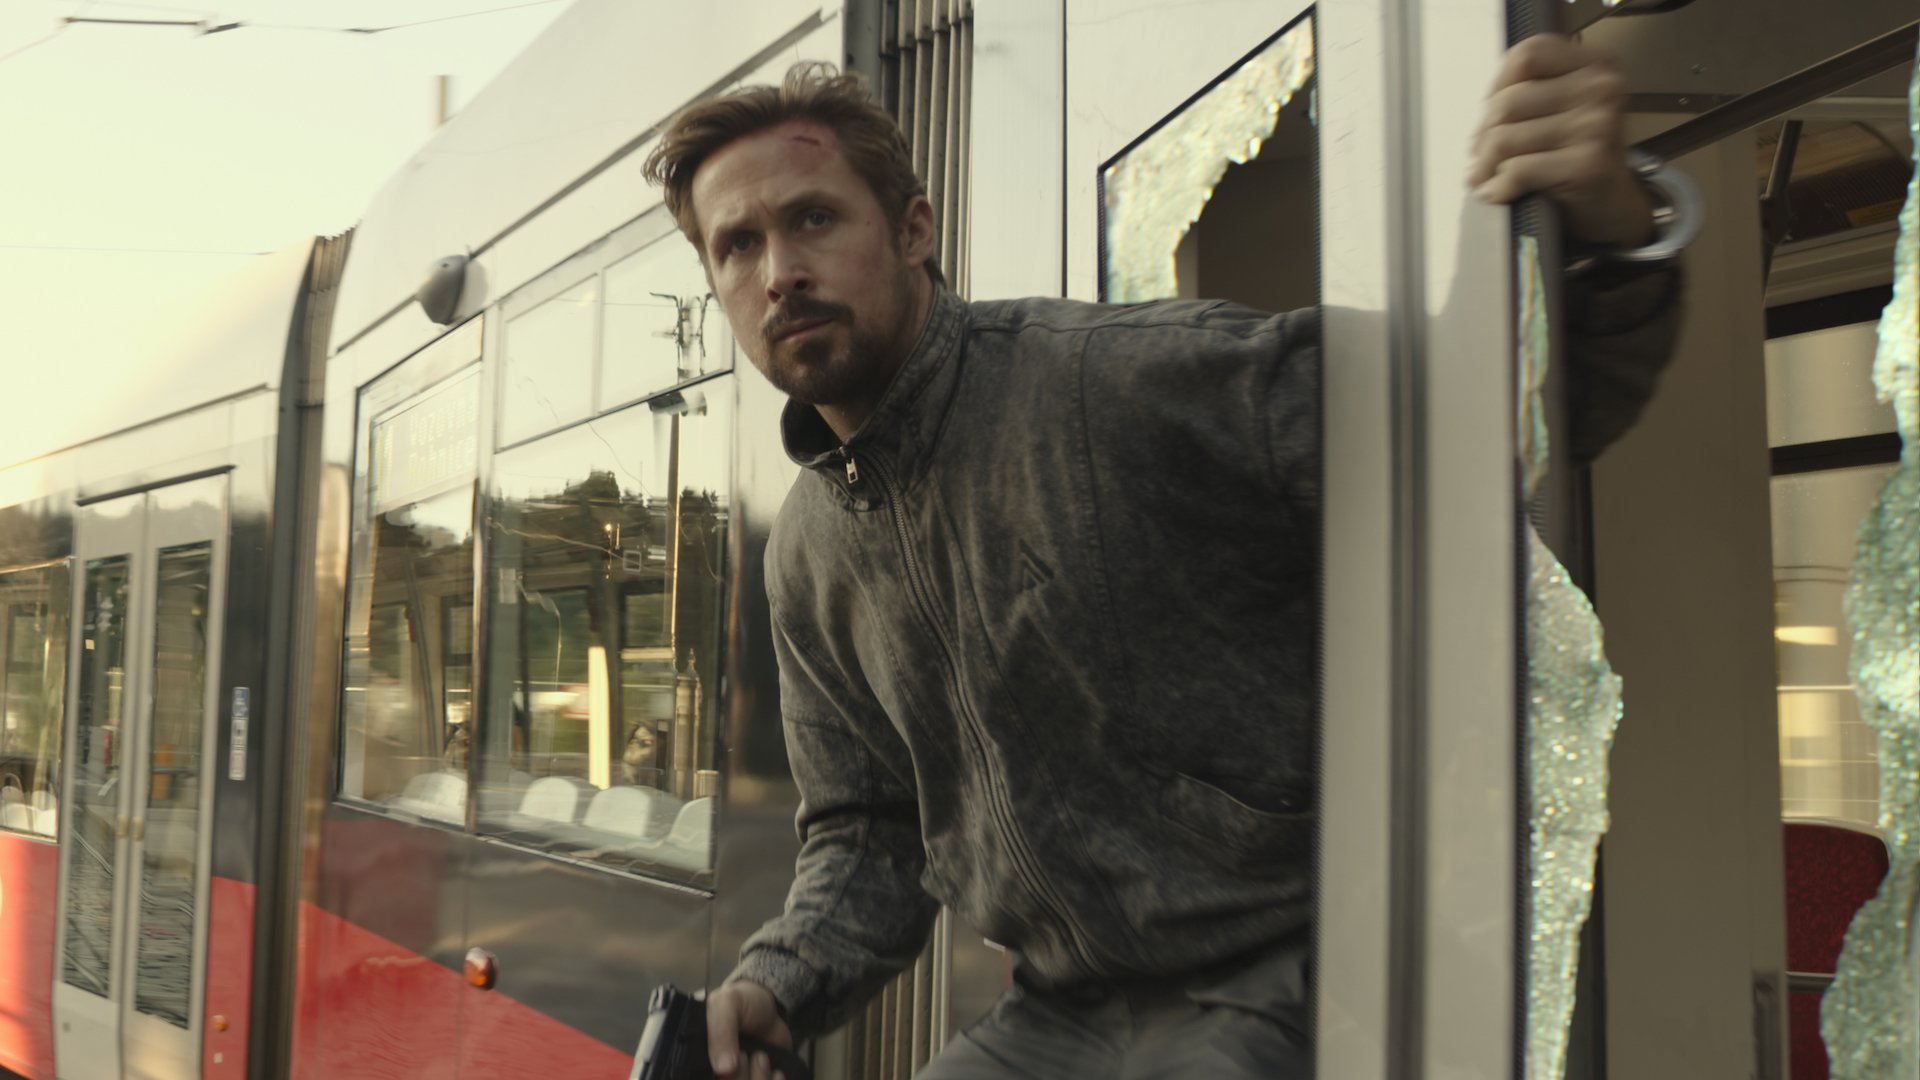 Ryan Gosling hangs out of a moving train holding a gun in the trailer for 